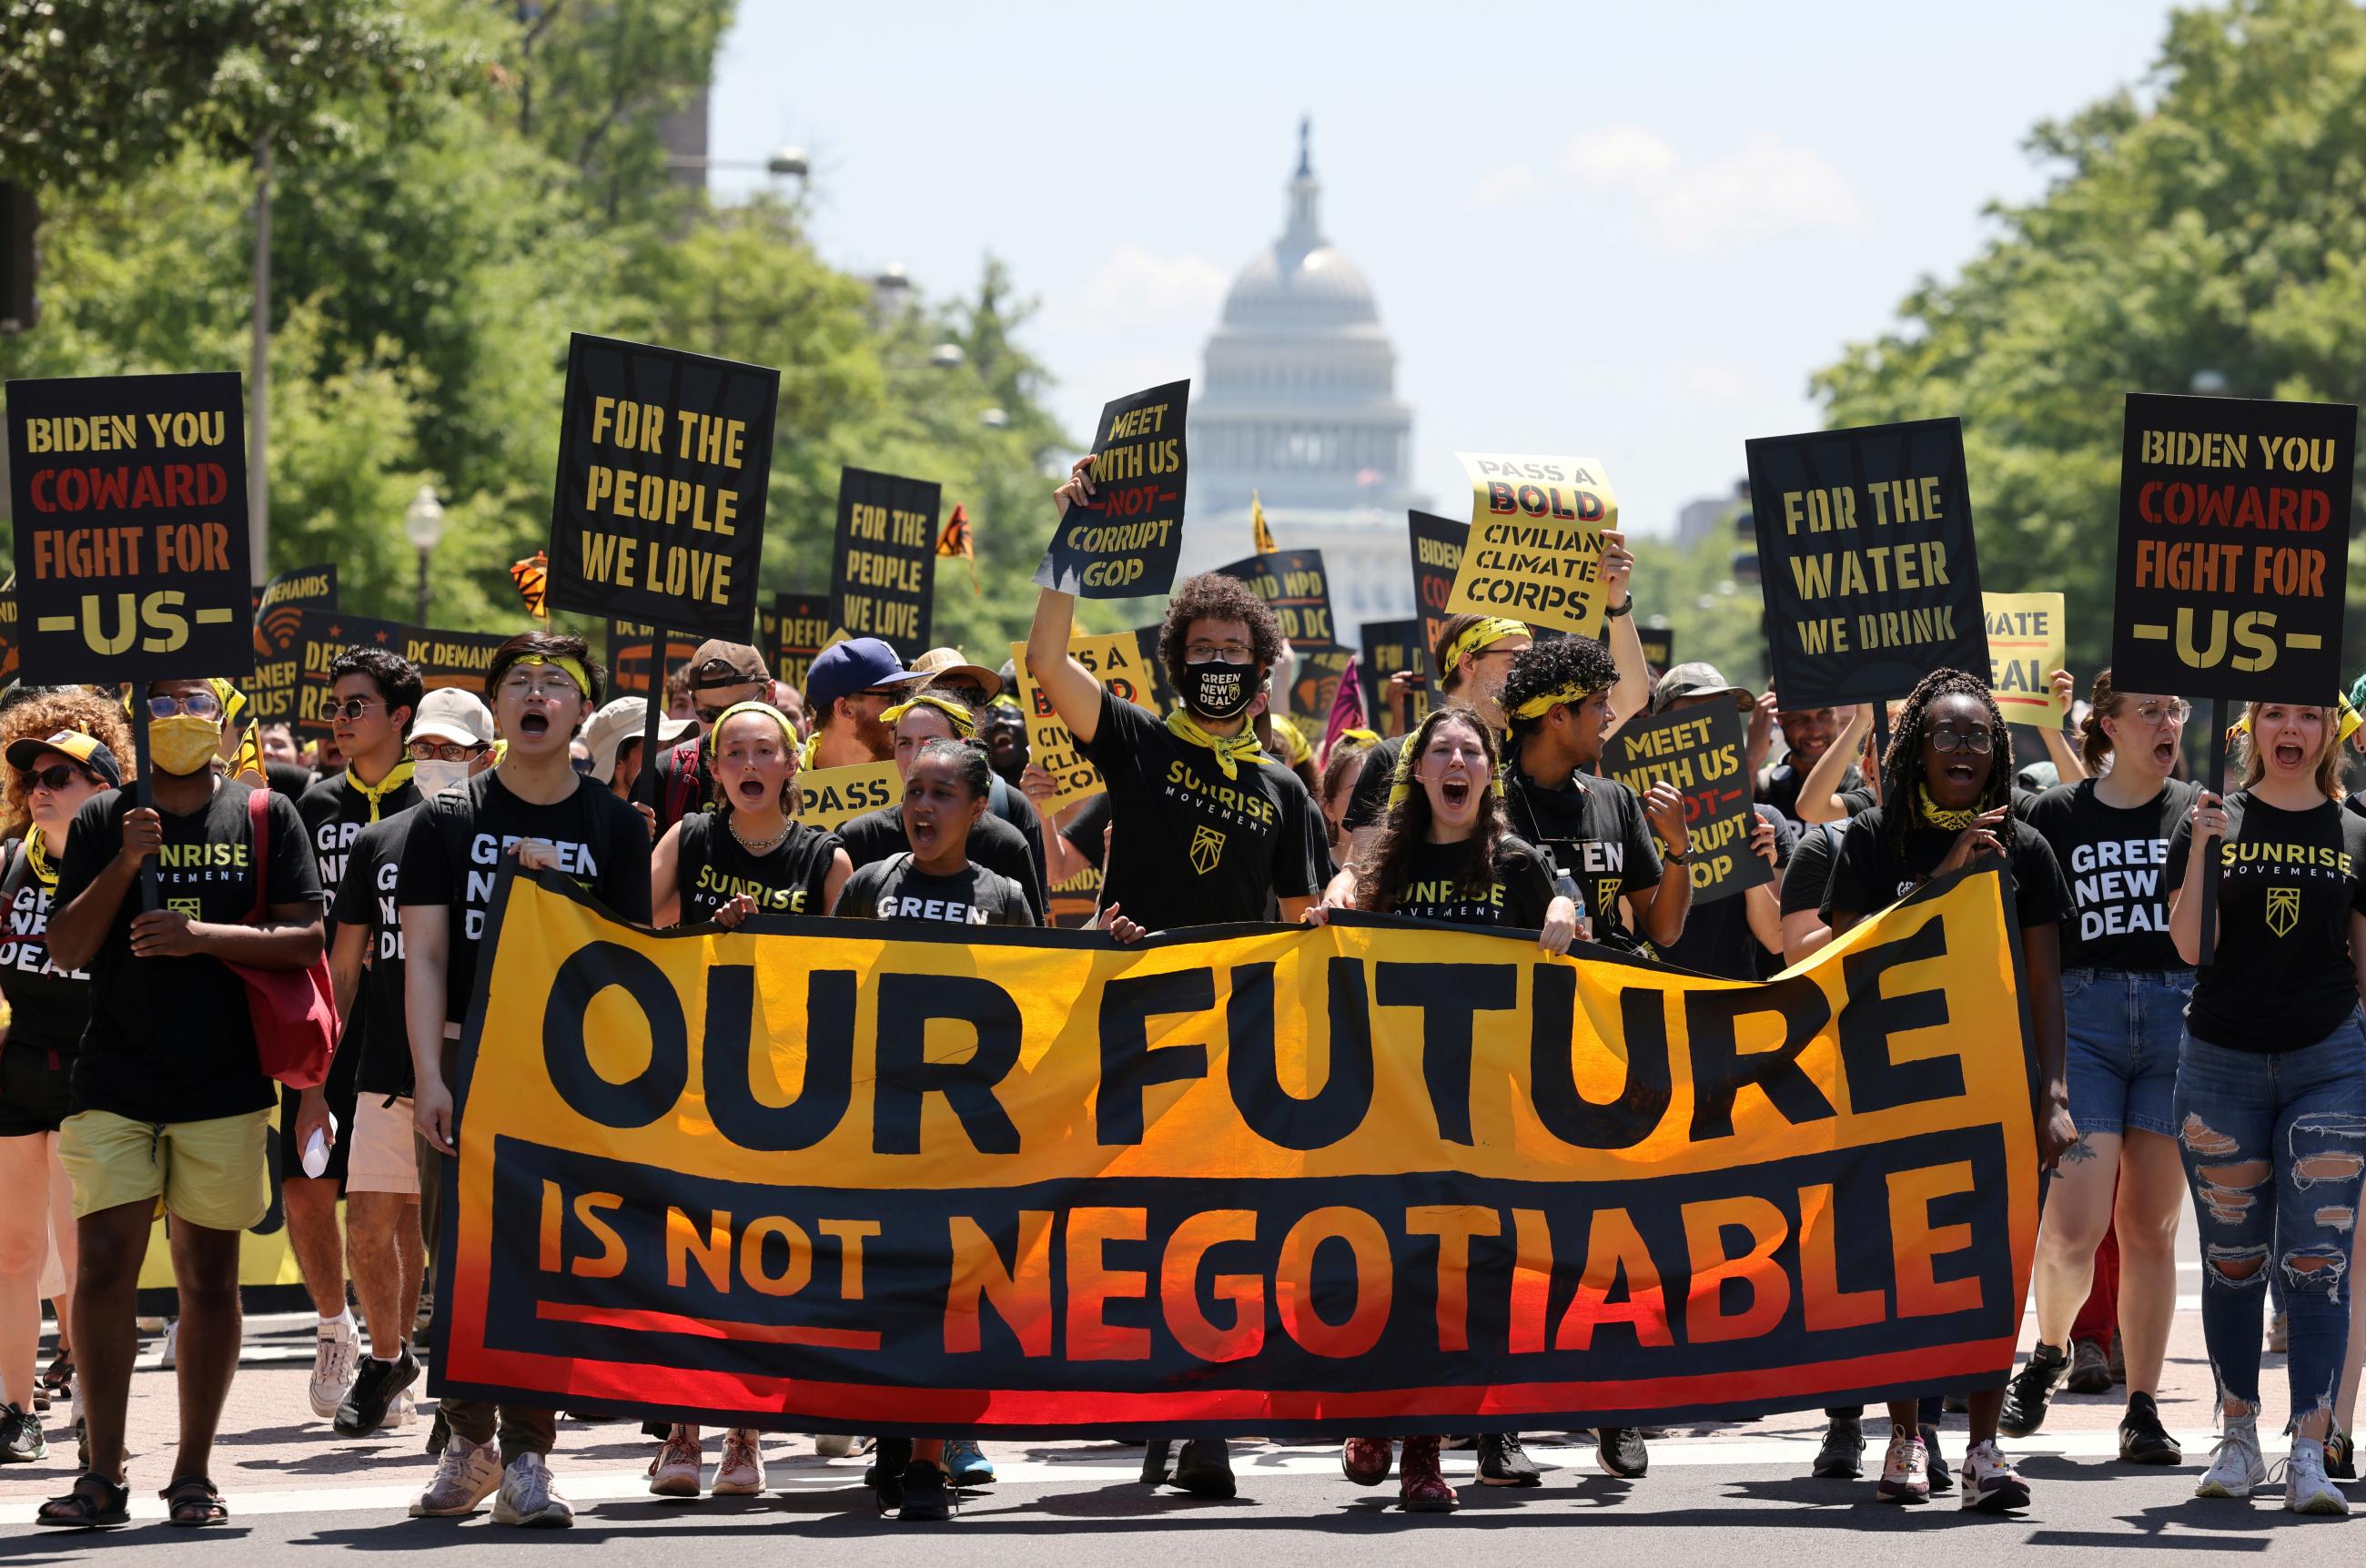 Demonstrators display signs and a banner during a "No Climate, No Deal" march on the White House, in Washington, DC, on June 28, 2021.